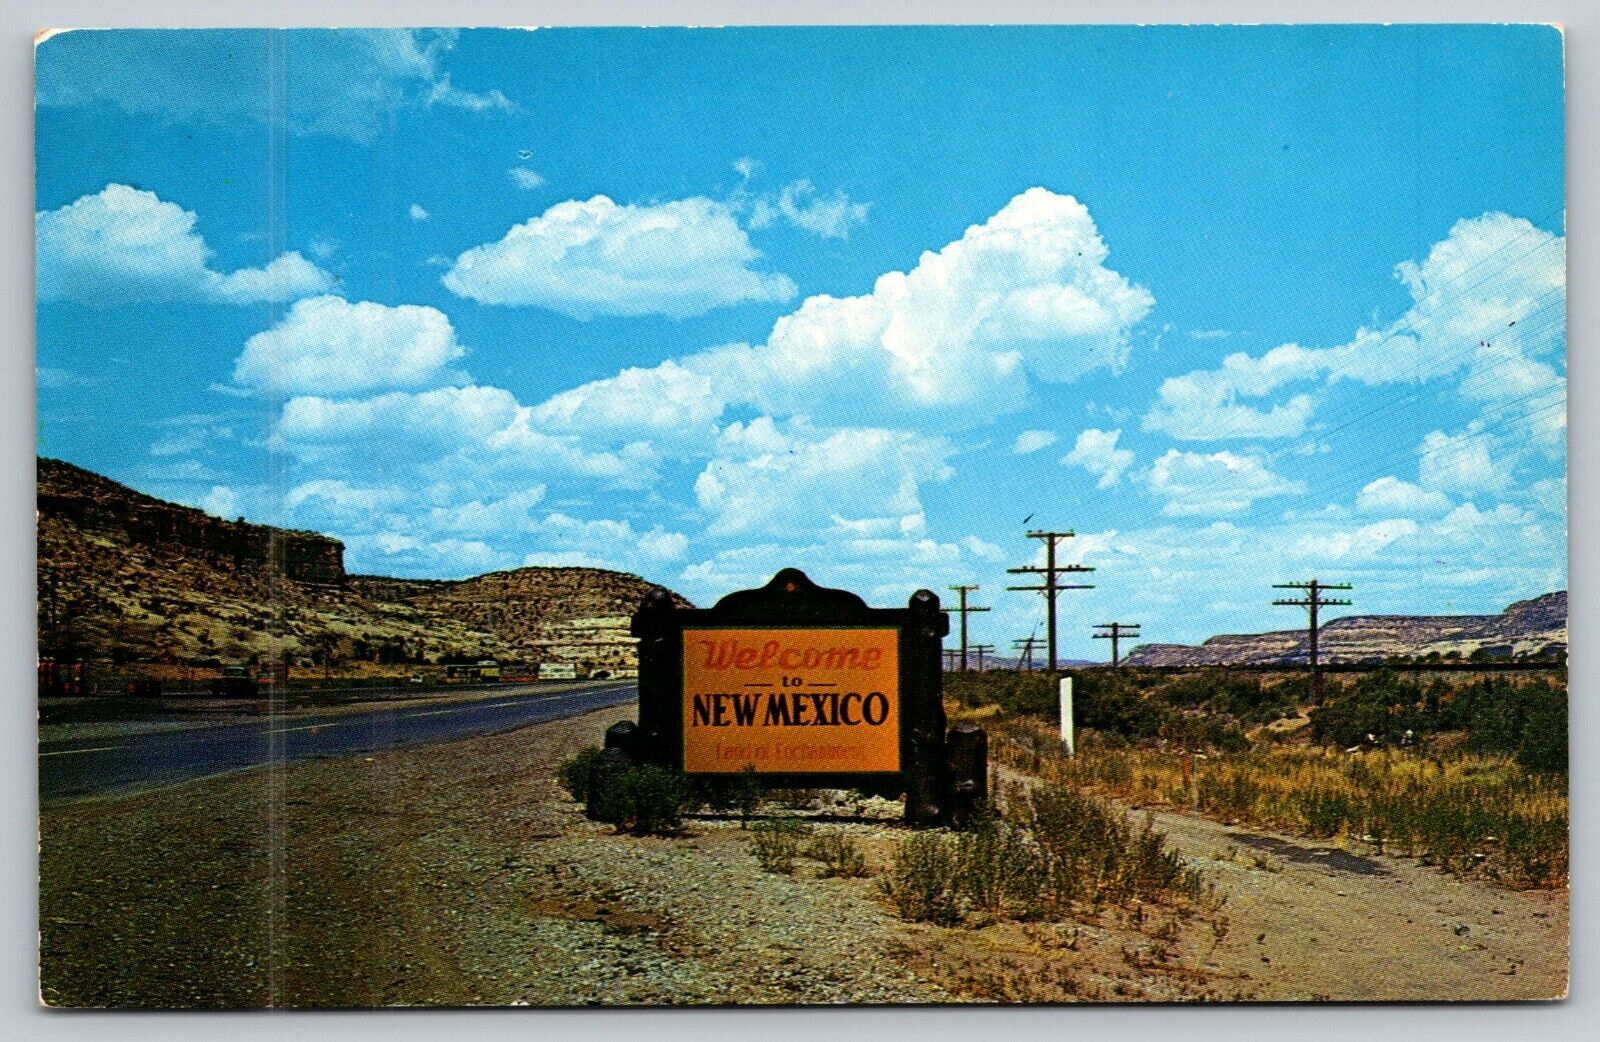 Postcard Greetings from New Mexico USA North America